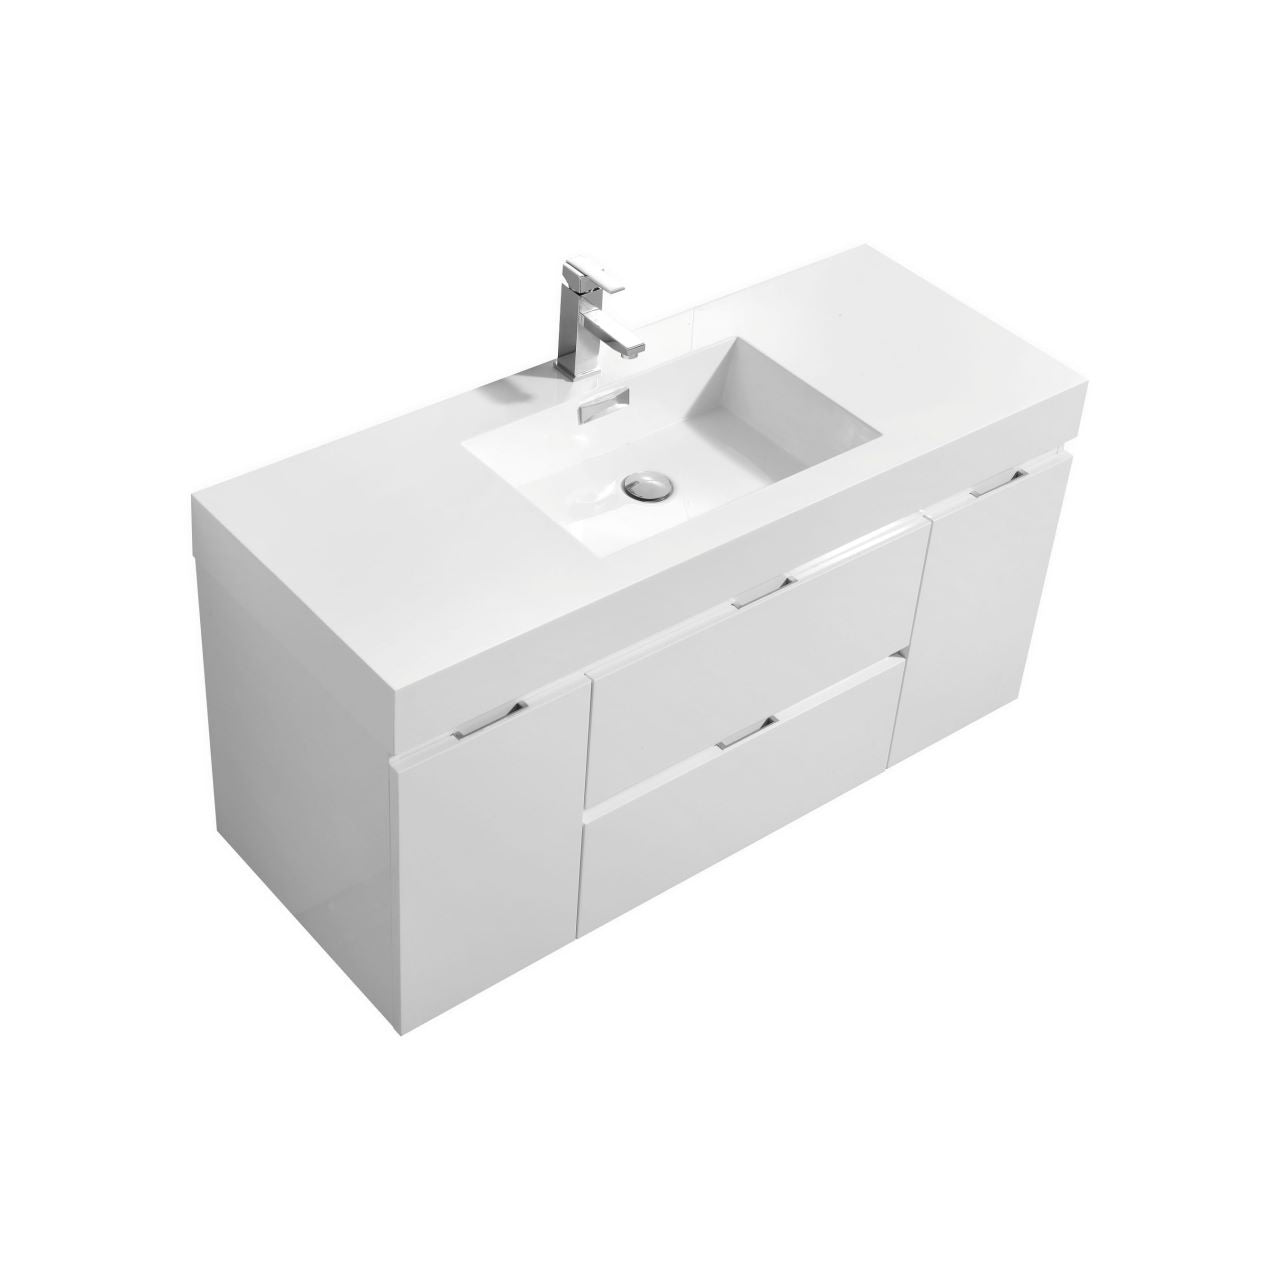 KUBEBATH Bliss BSL48-GW 48" Single Wall Mount Bathroom Vanity in High Gloss White with White Acrylic Composite, Integrated Sink, Angled View